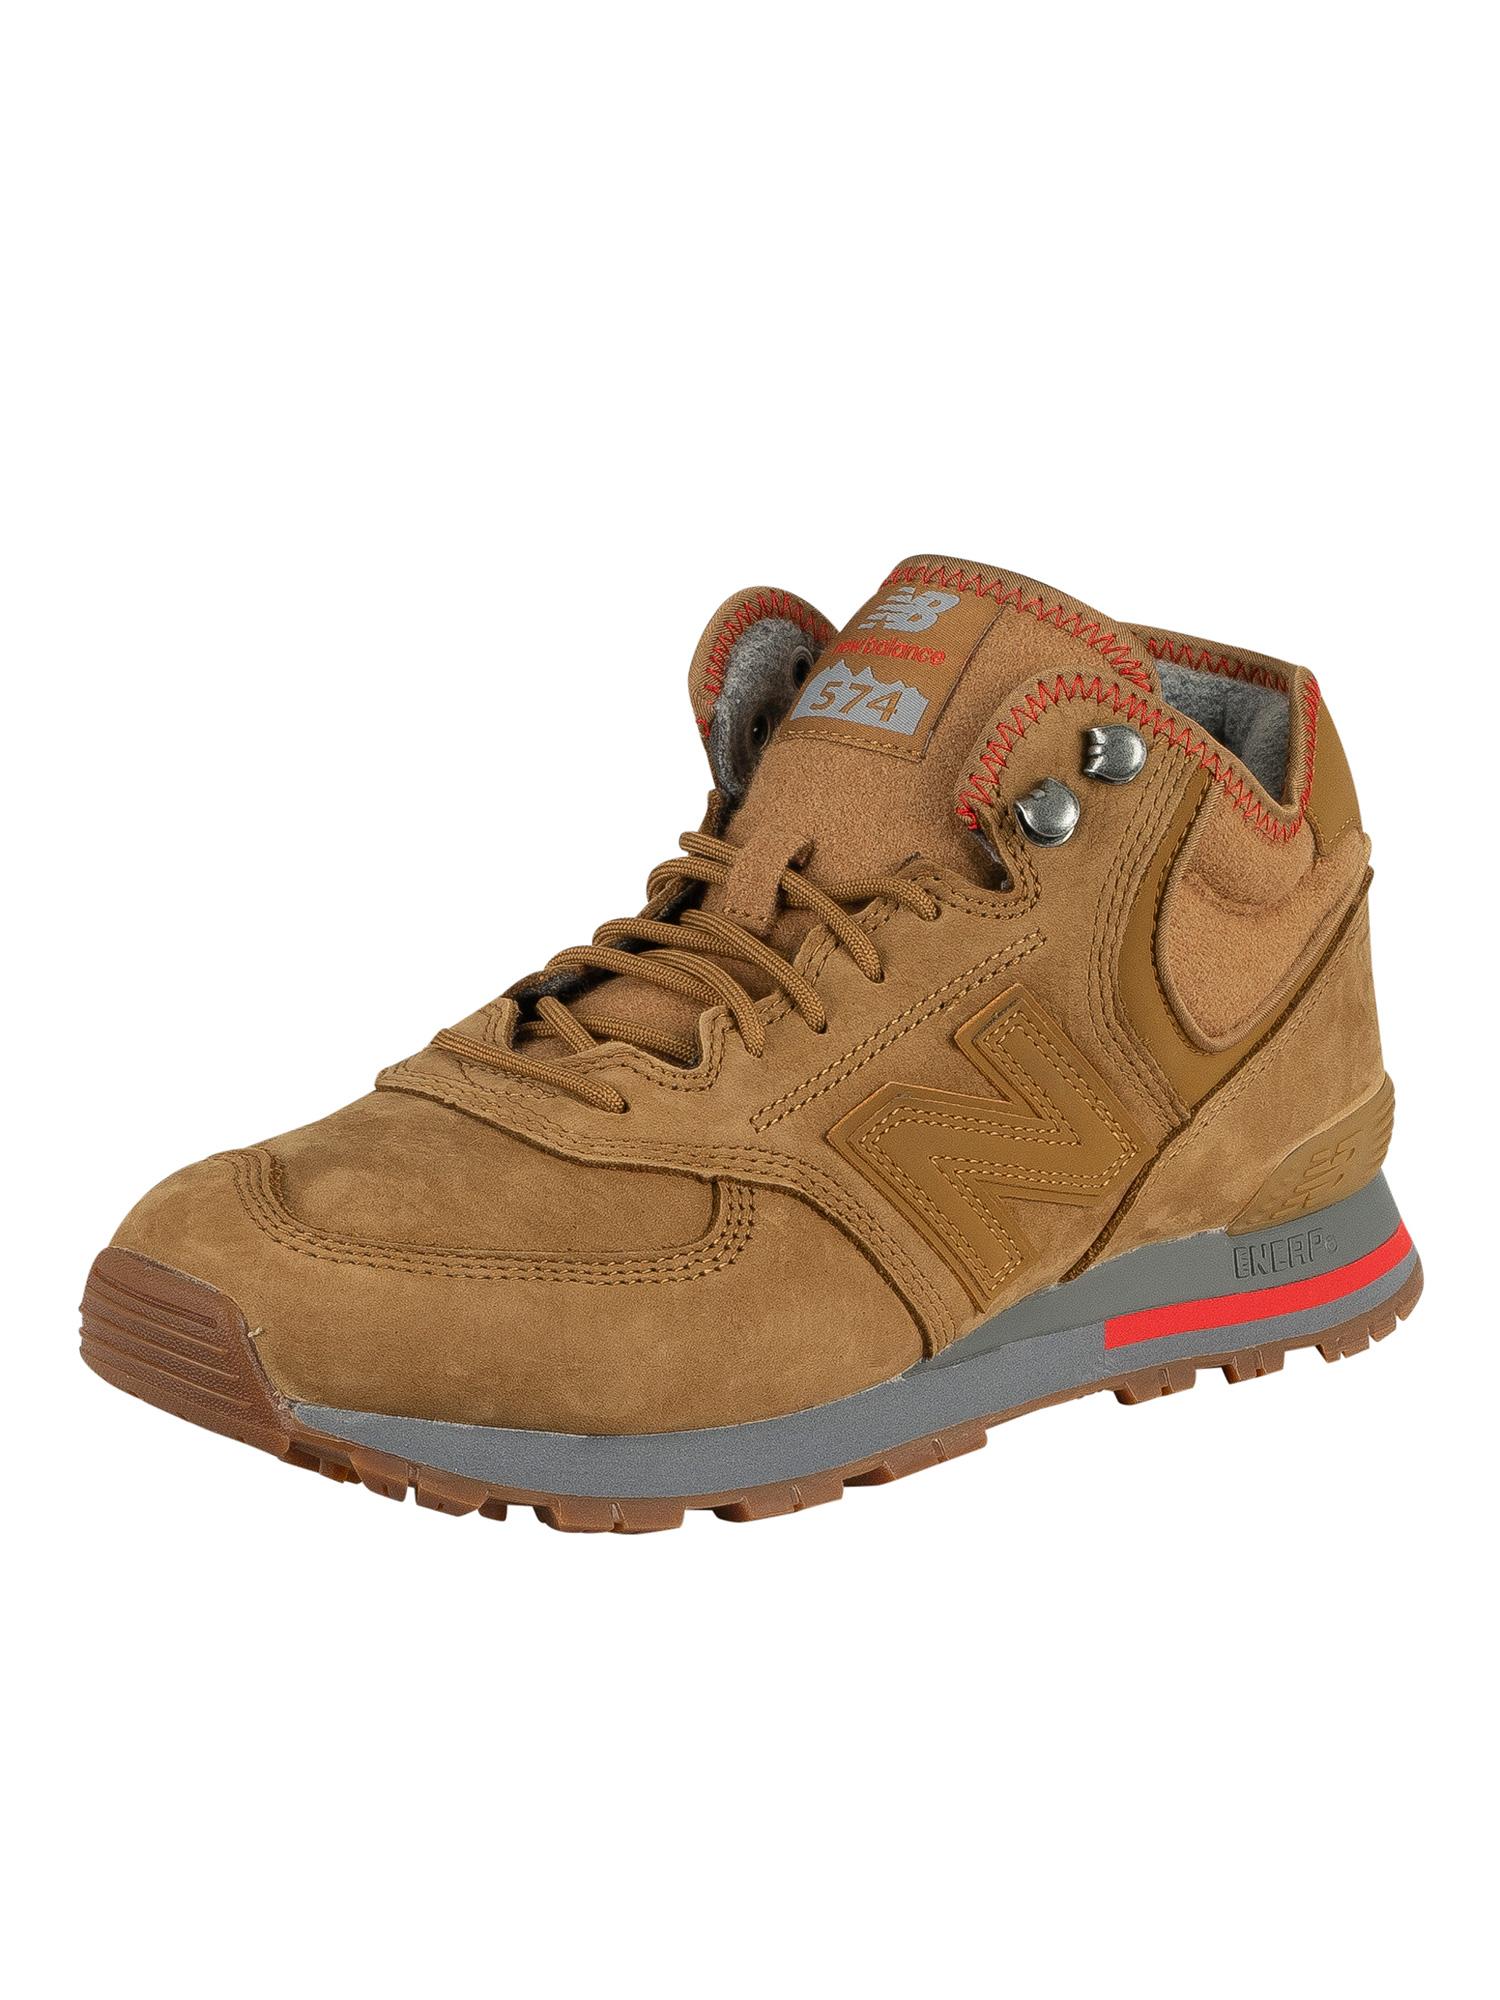 New Balance Leather 574 Mid Premium Hiker Trainers in Brown for ...